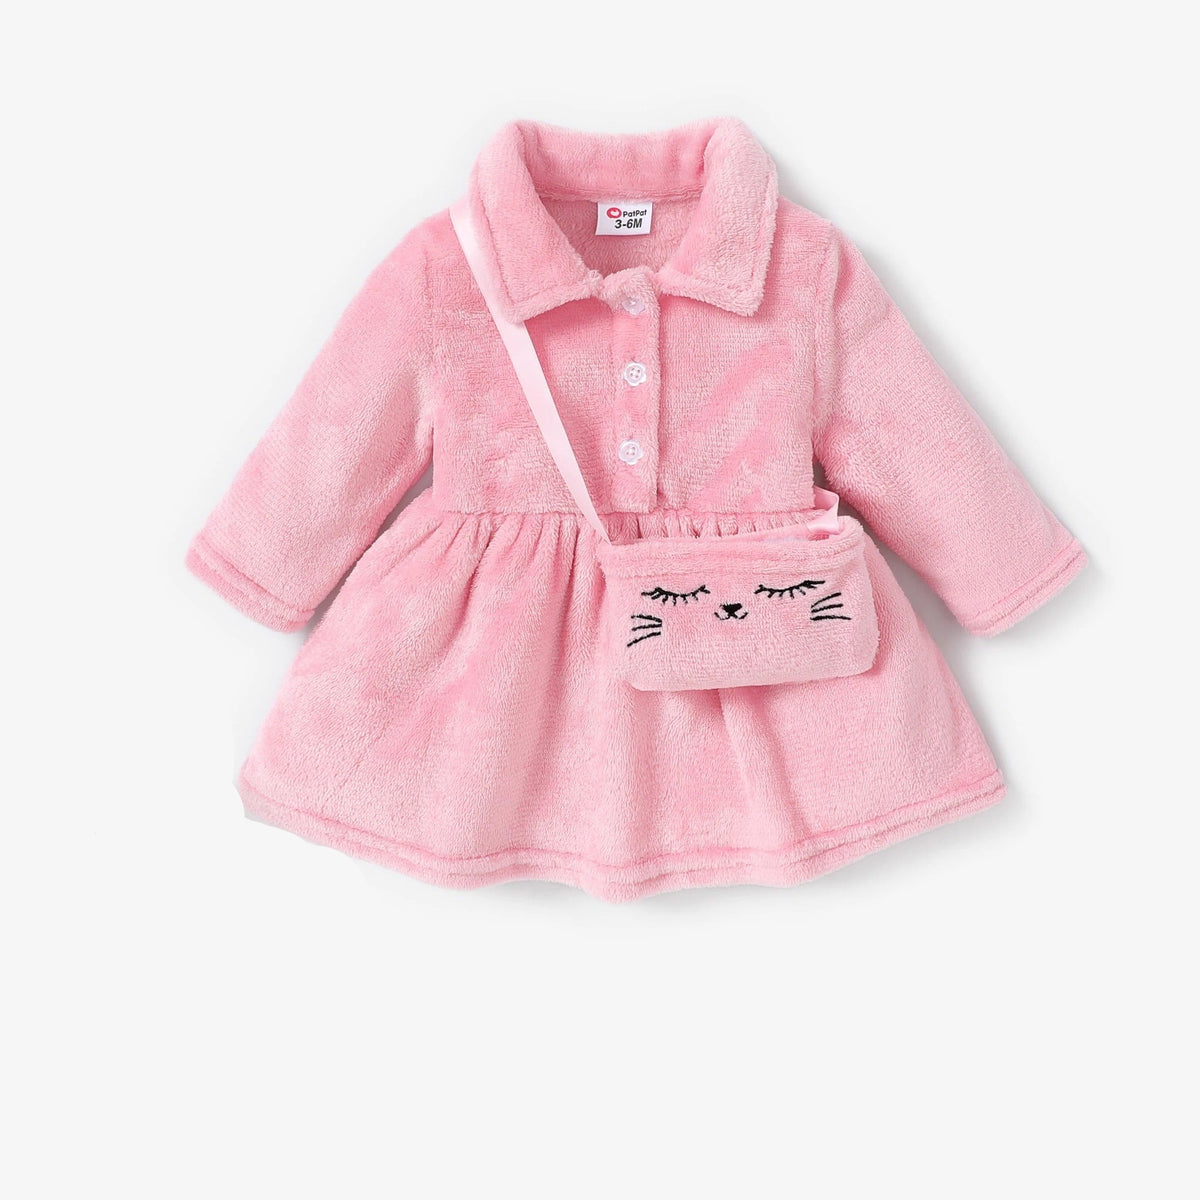 Adorable Baby Girl Dress Set with Cute Cat Bag